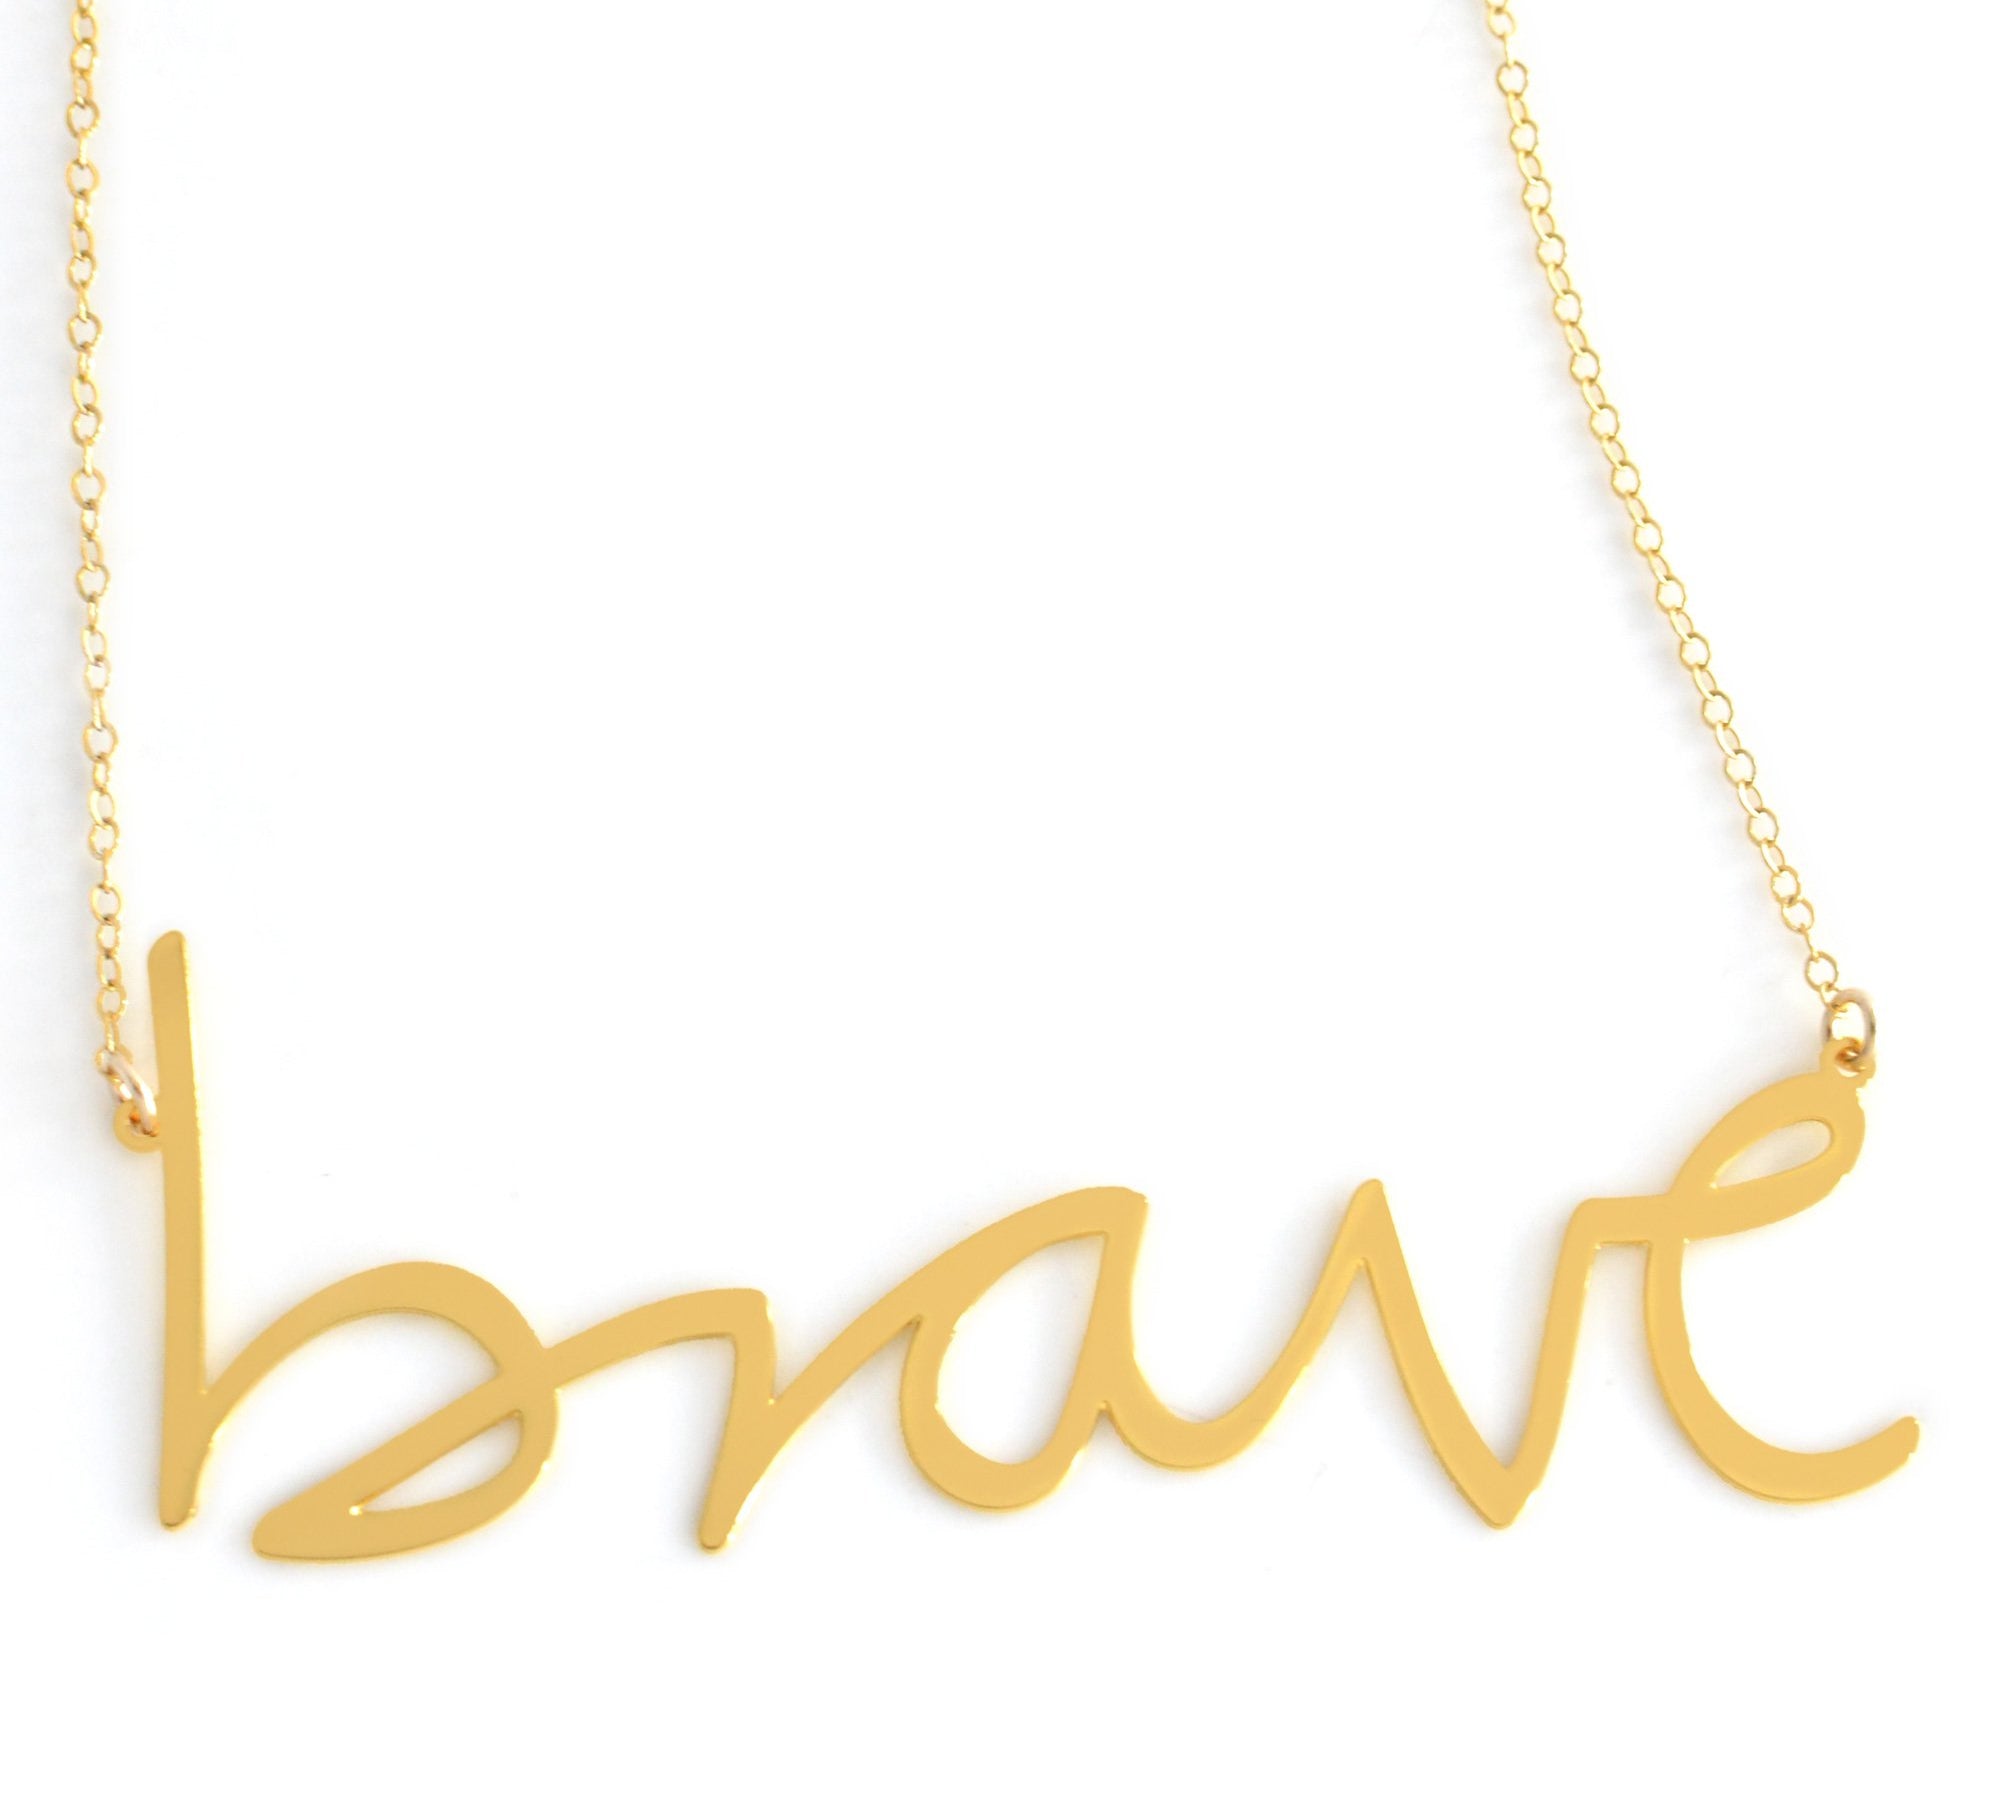 Brave Necklace - High Quality, Affordable, Hand Written, Empowering, Self Love, Mantra Word Necklace - Available in Gold and Silver - Small and Large Sizes - Made in USA - Brevity Jewelry